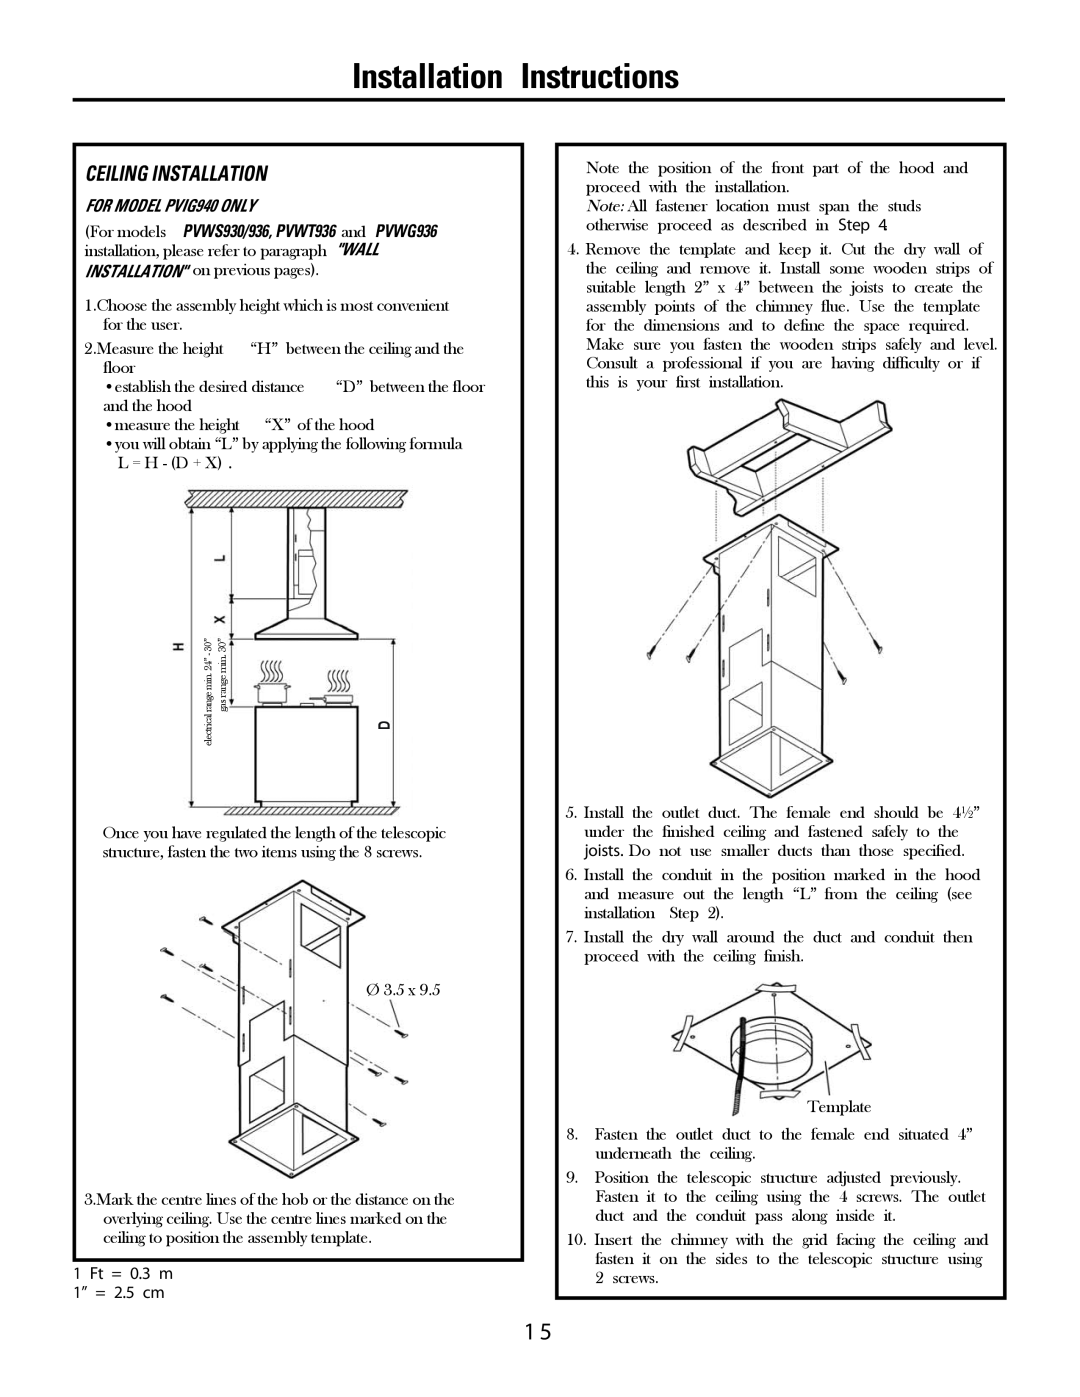 GE PVWT936, PVWS930 Ceiling Installation, Installation Instructions, FOR MODEL PVIG940 ONLY, 1 Ft = 0.3 m 1” = 2.5 cm 